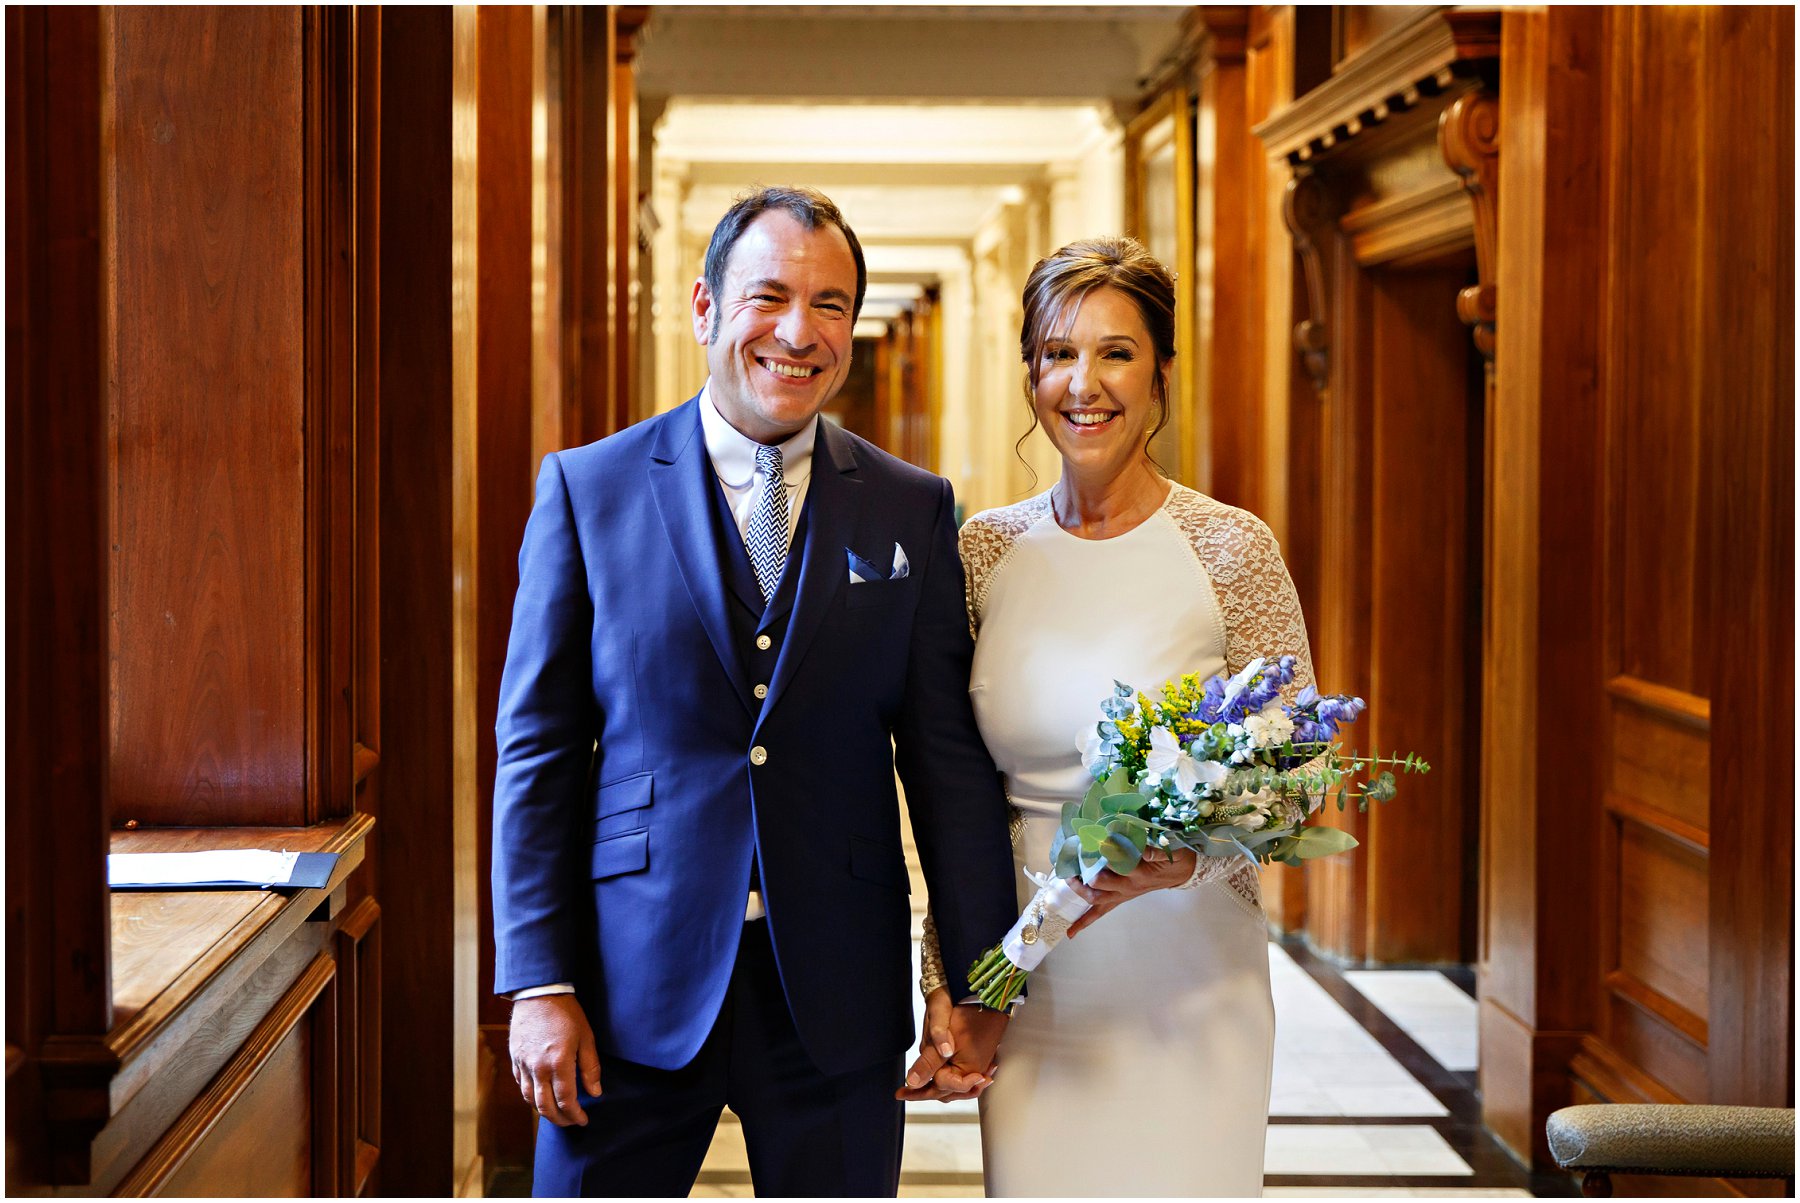 Bride and Groom wait in anticipation in the hallway of Old Marylebone Town Hall to enter their Soho Room ceremony